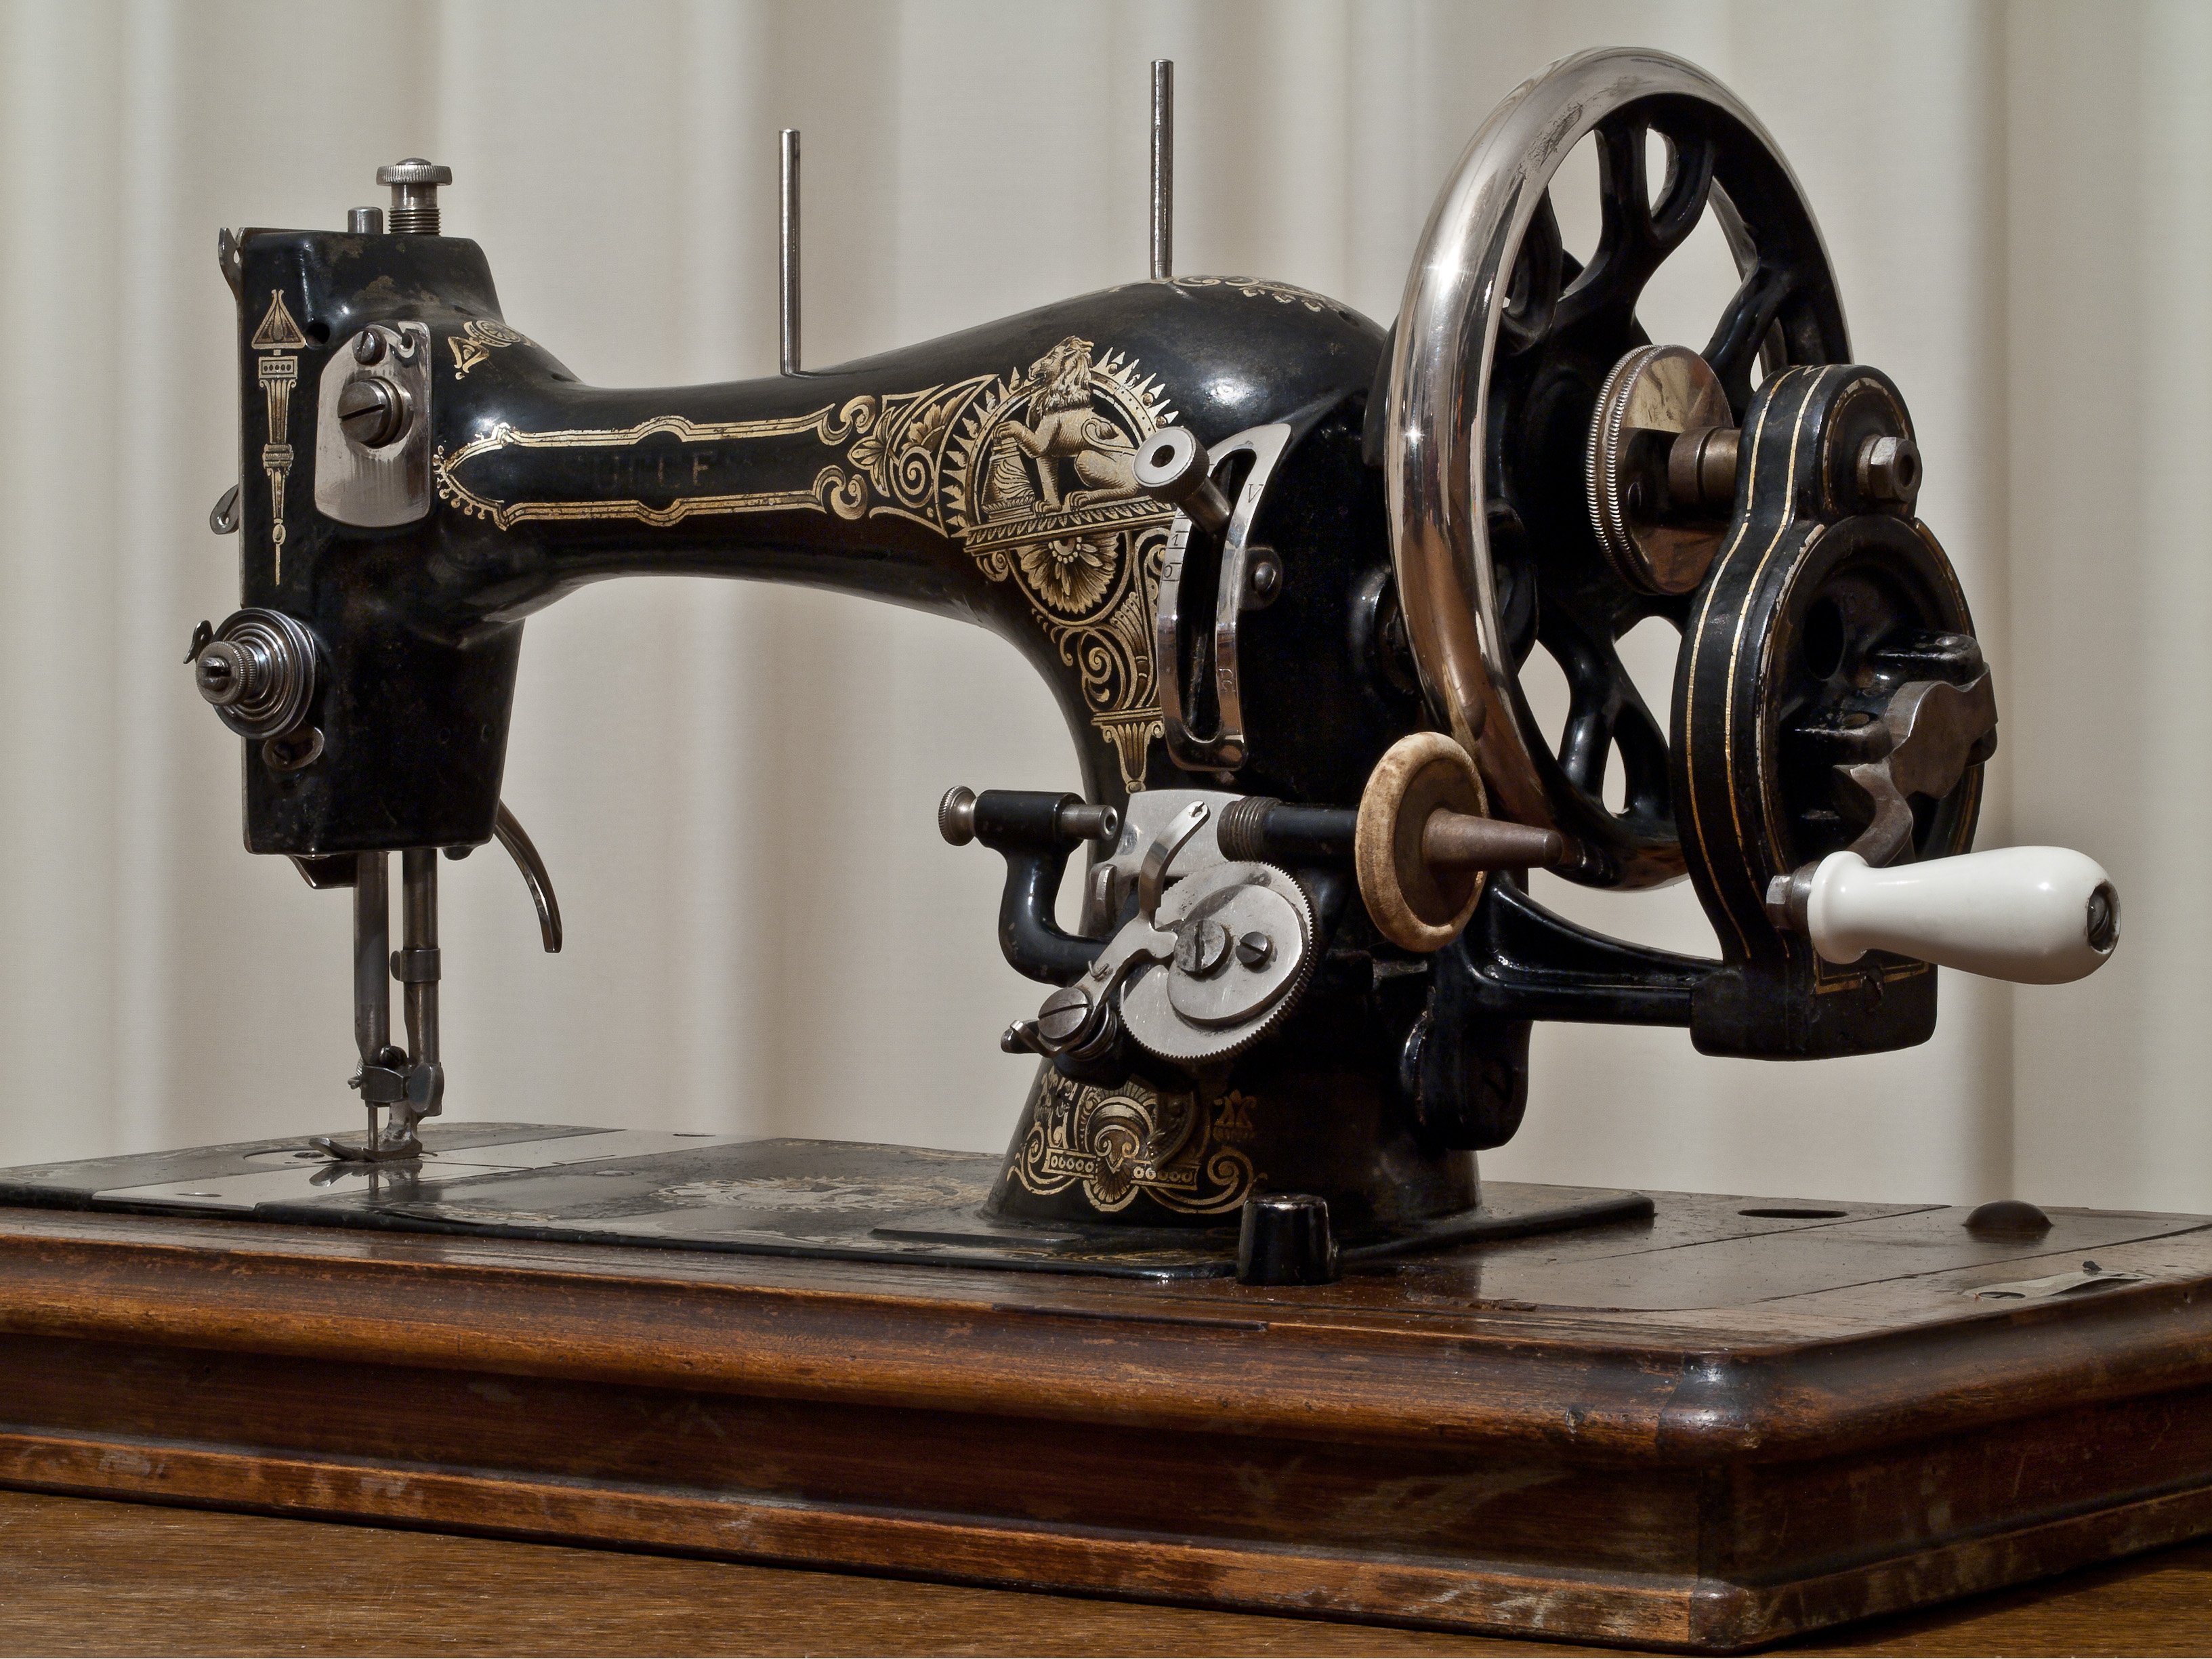 Vintage Sewing Machine Restoration And Maintenance Georgetown Peabody Library